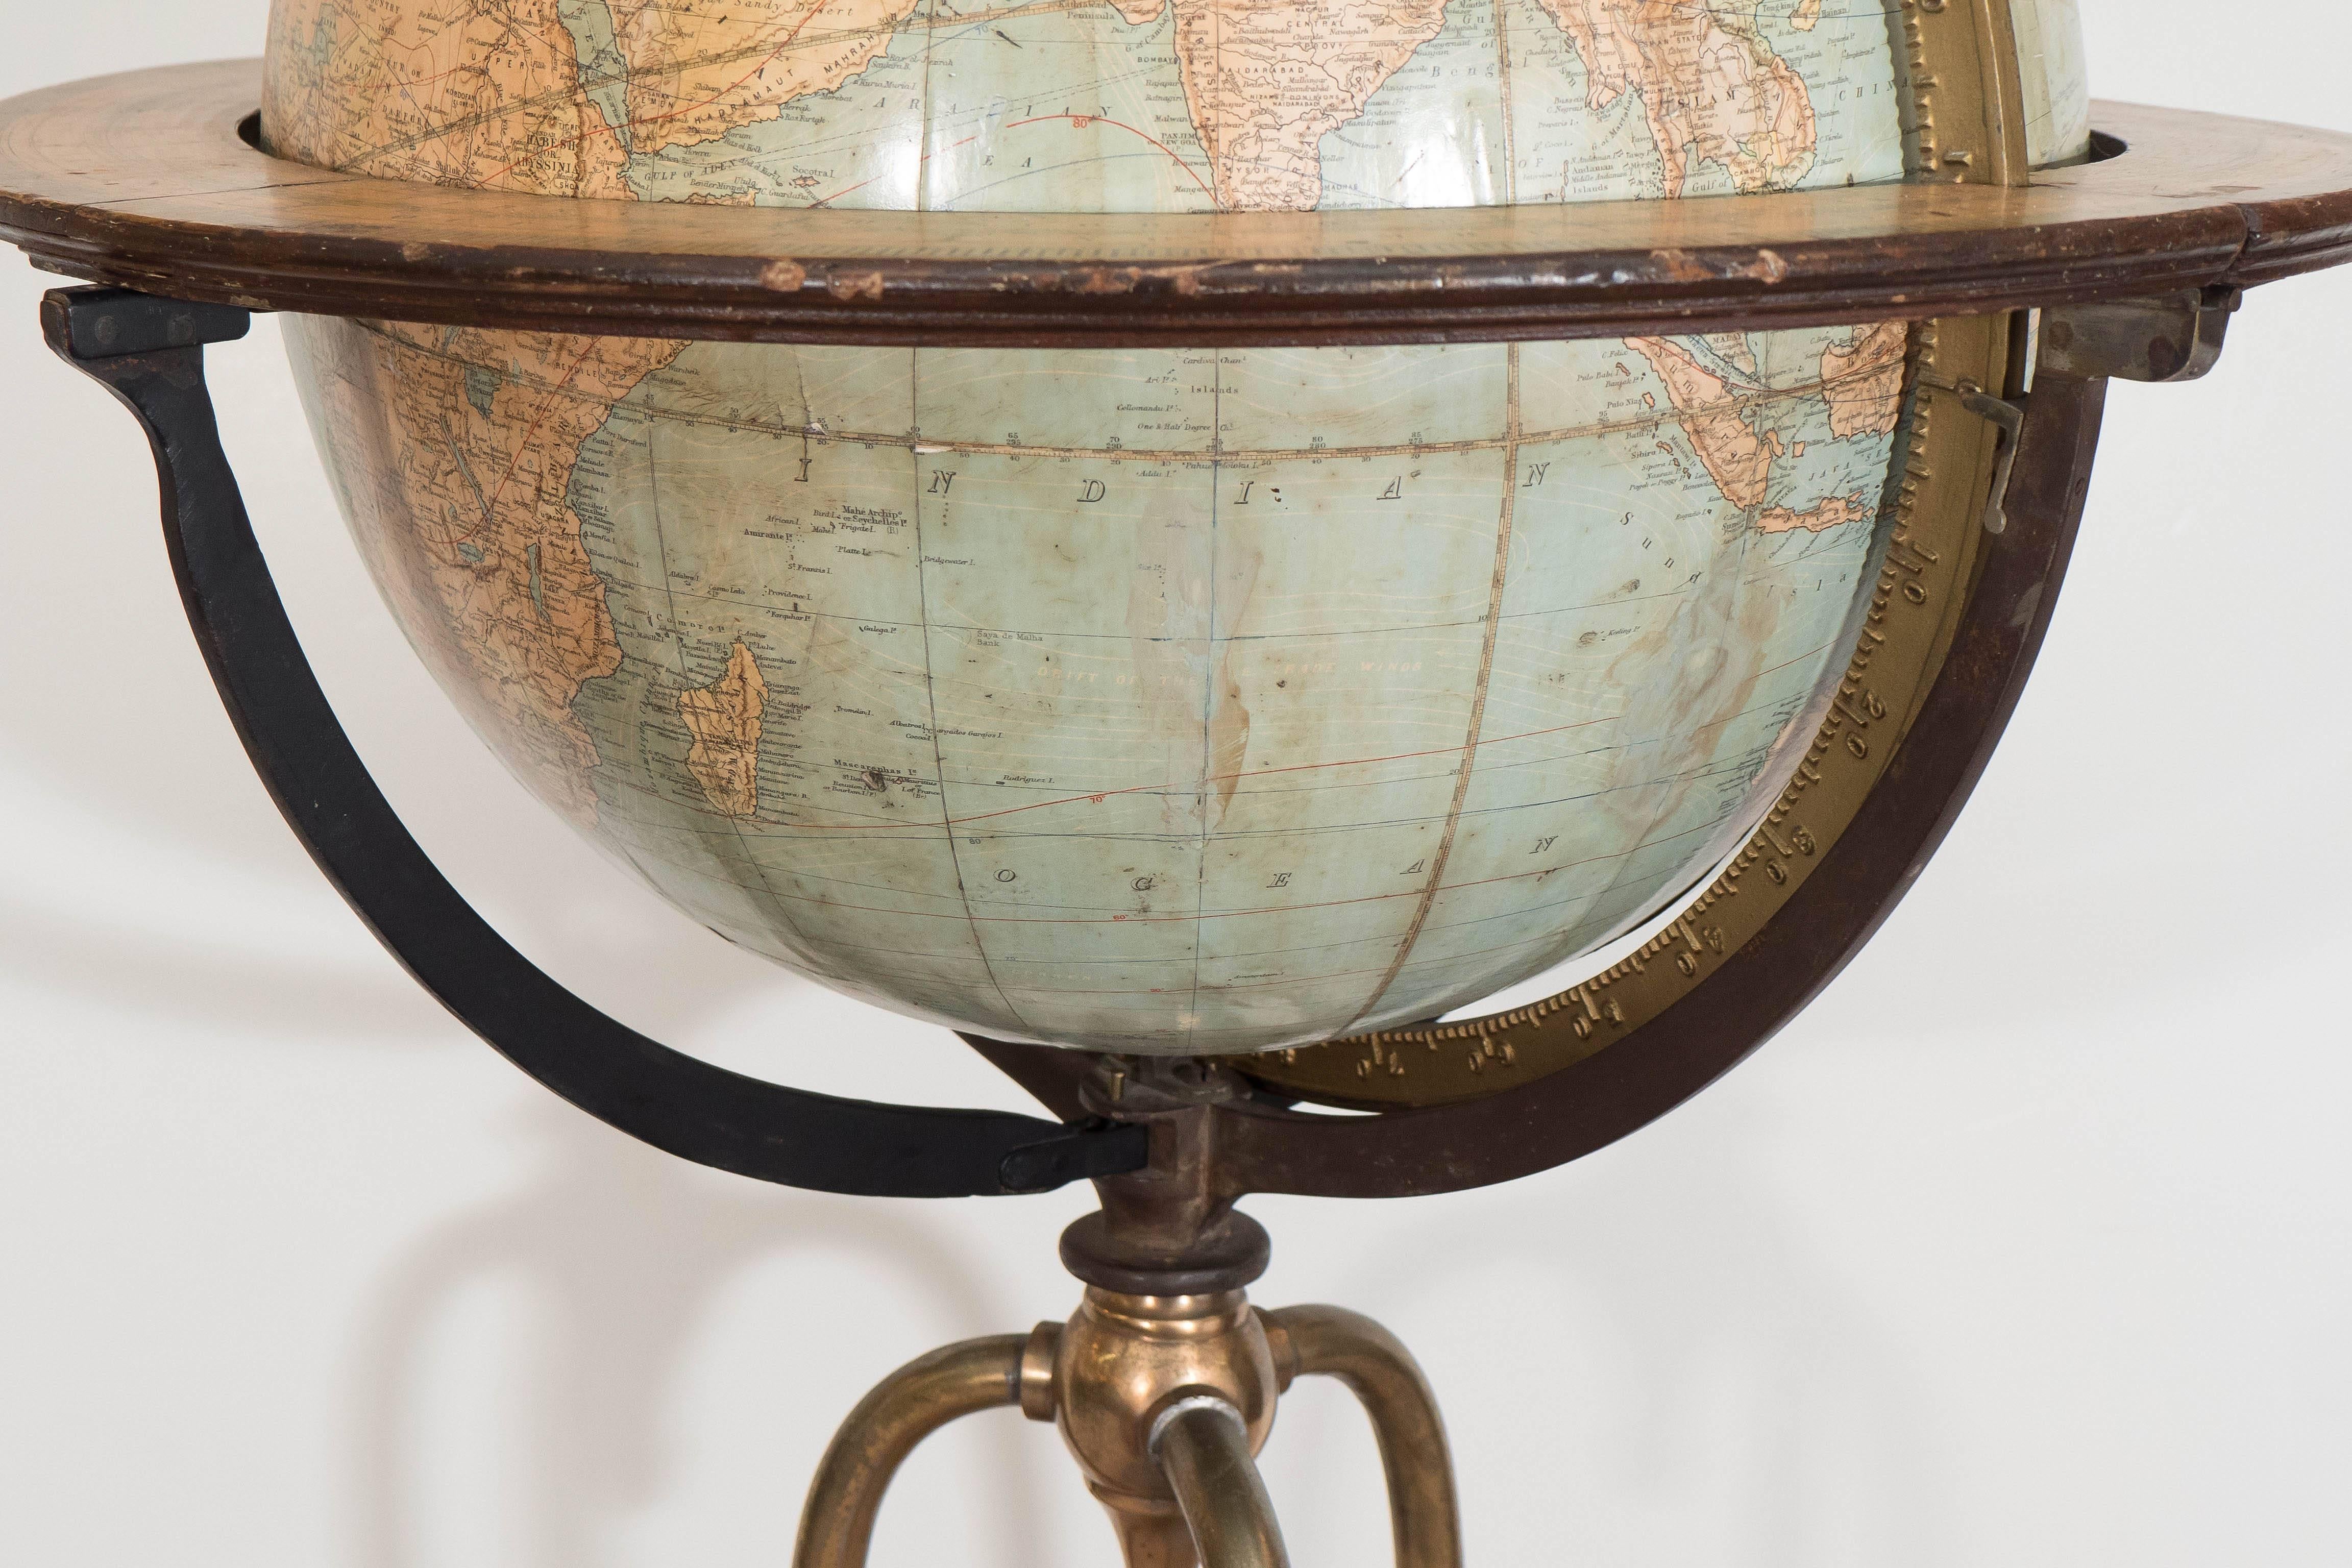 Donohue & Henneberry Terrestrial Globe on Stand 2